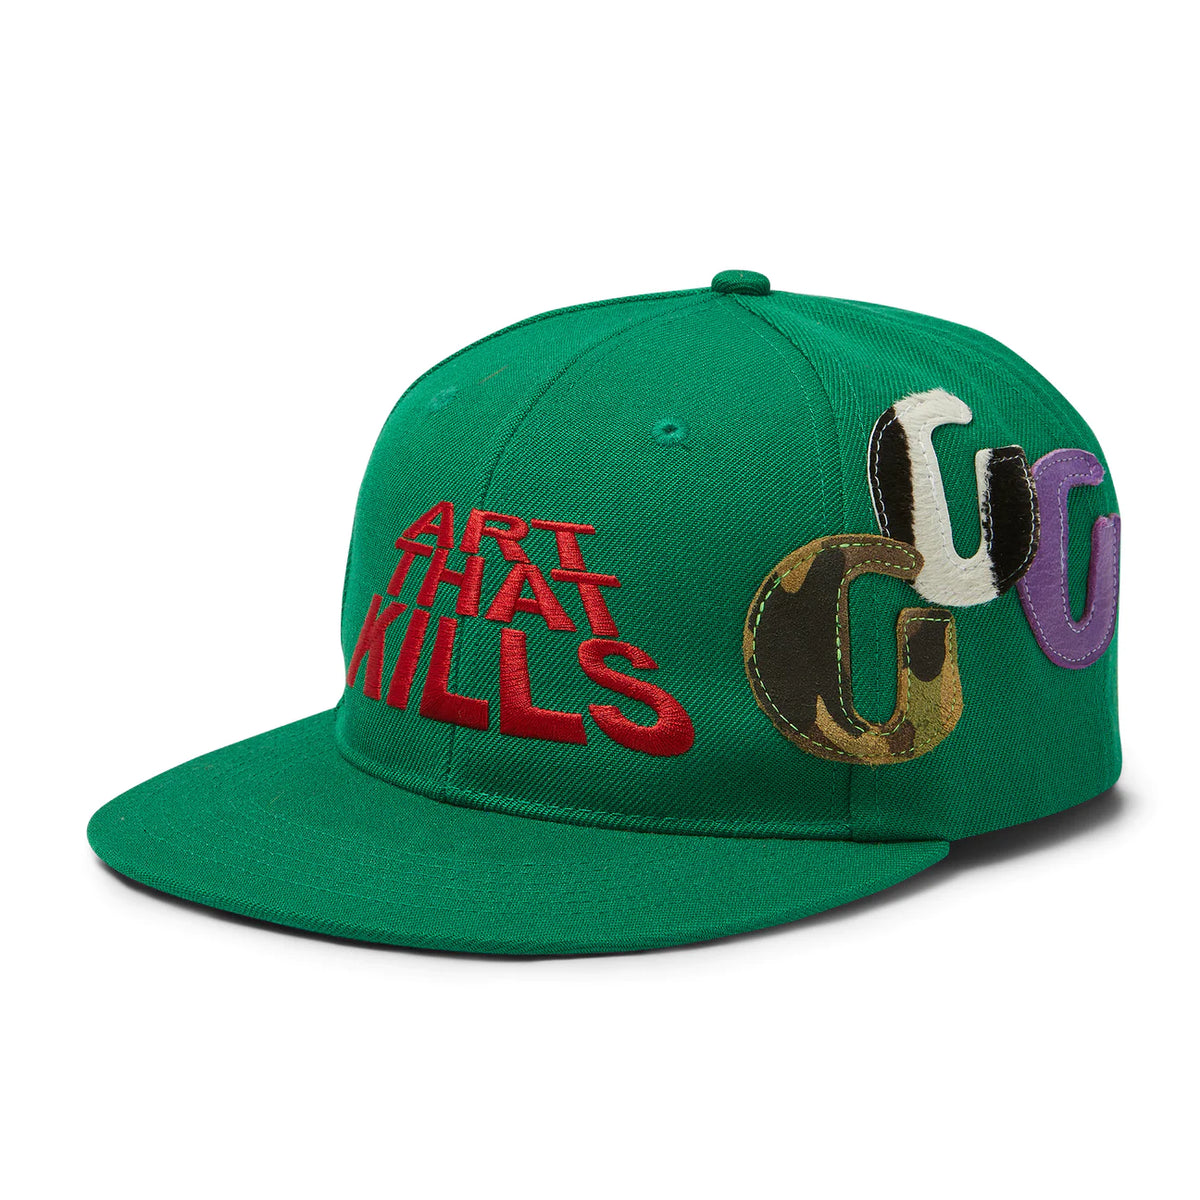 Gallery Dept. Art That Kills G-Patch Fitted Cap Green